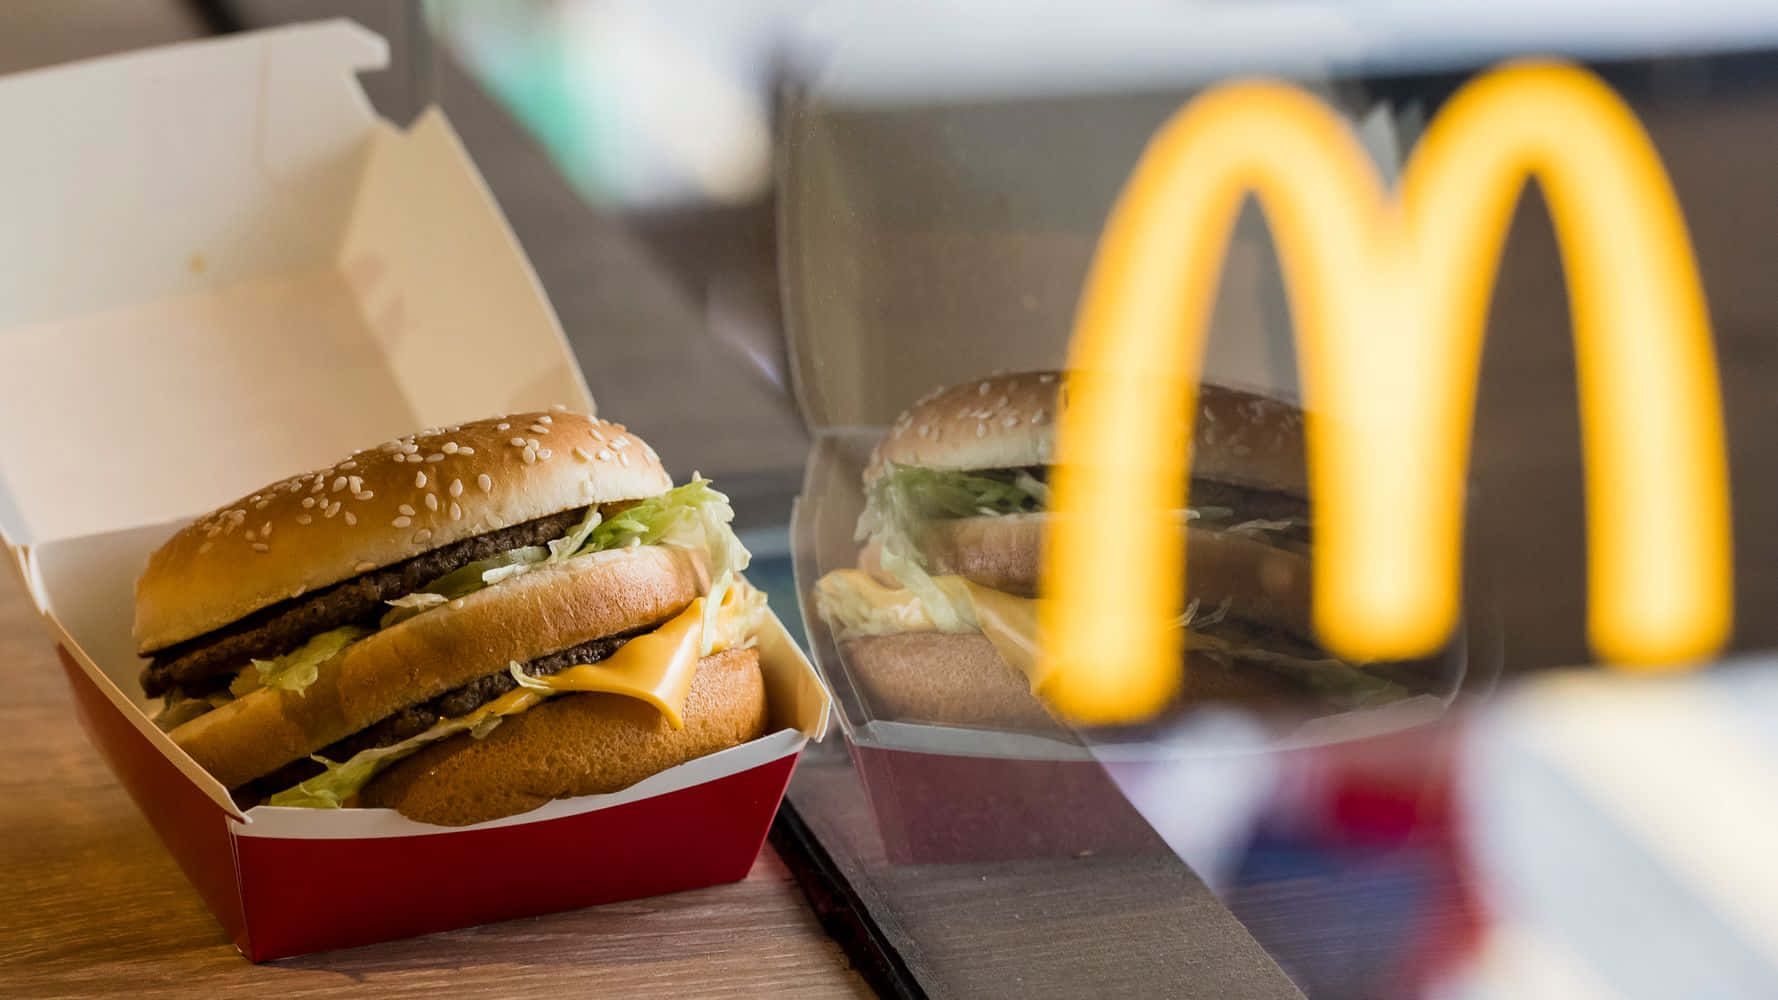 A Mcdonald's Burger Is Sitting In A Box